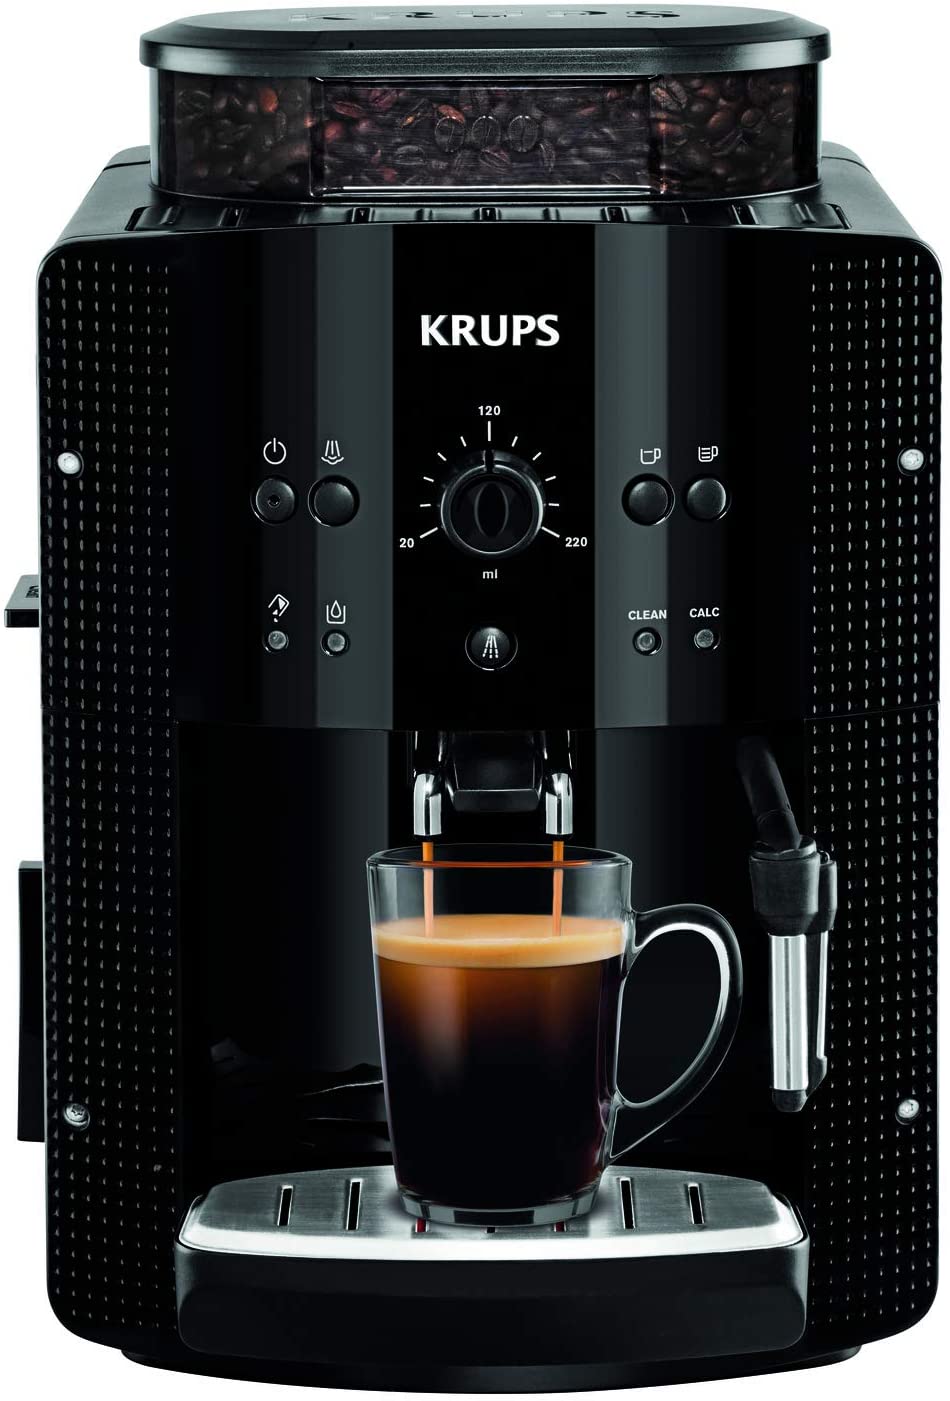 Krups Essential EA8108 Fully Automatic Coffee Machine Espresso and Coffee with CappuccinoPlus Milk Nozzle Black & F 088 01 Water Filter for All Orchestro Models Espresso / Coffee Machine Accessories